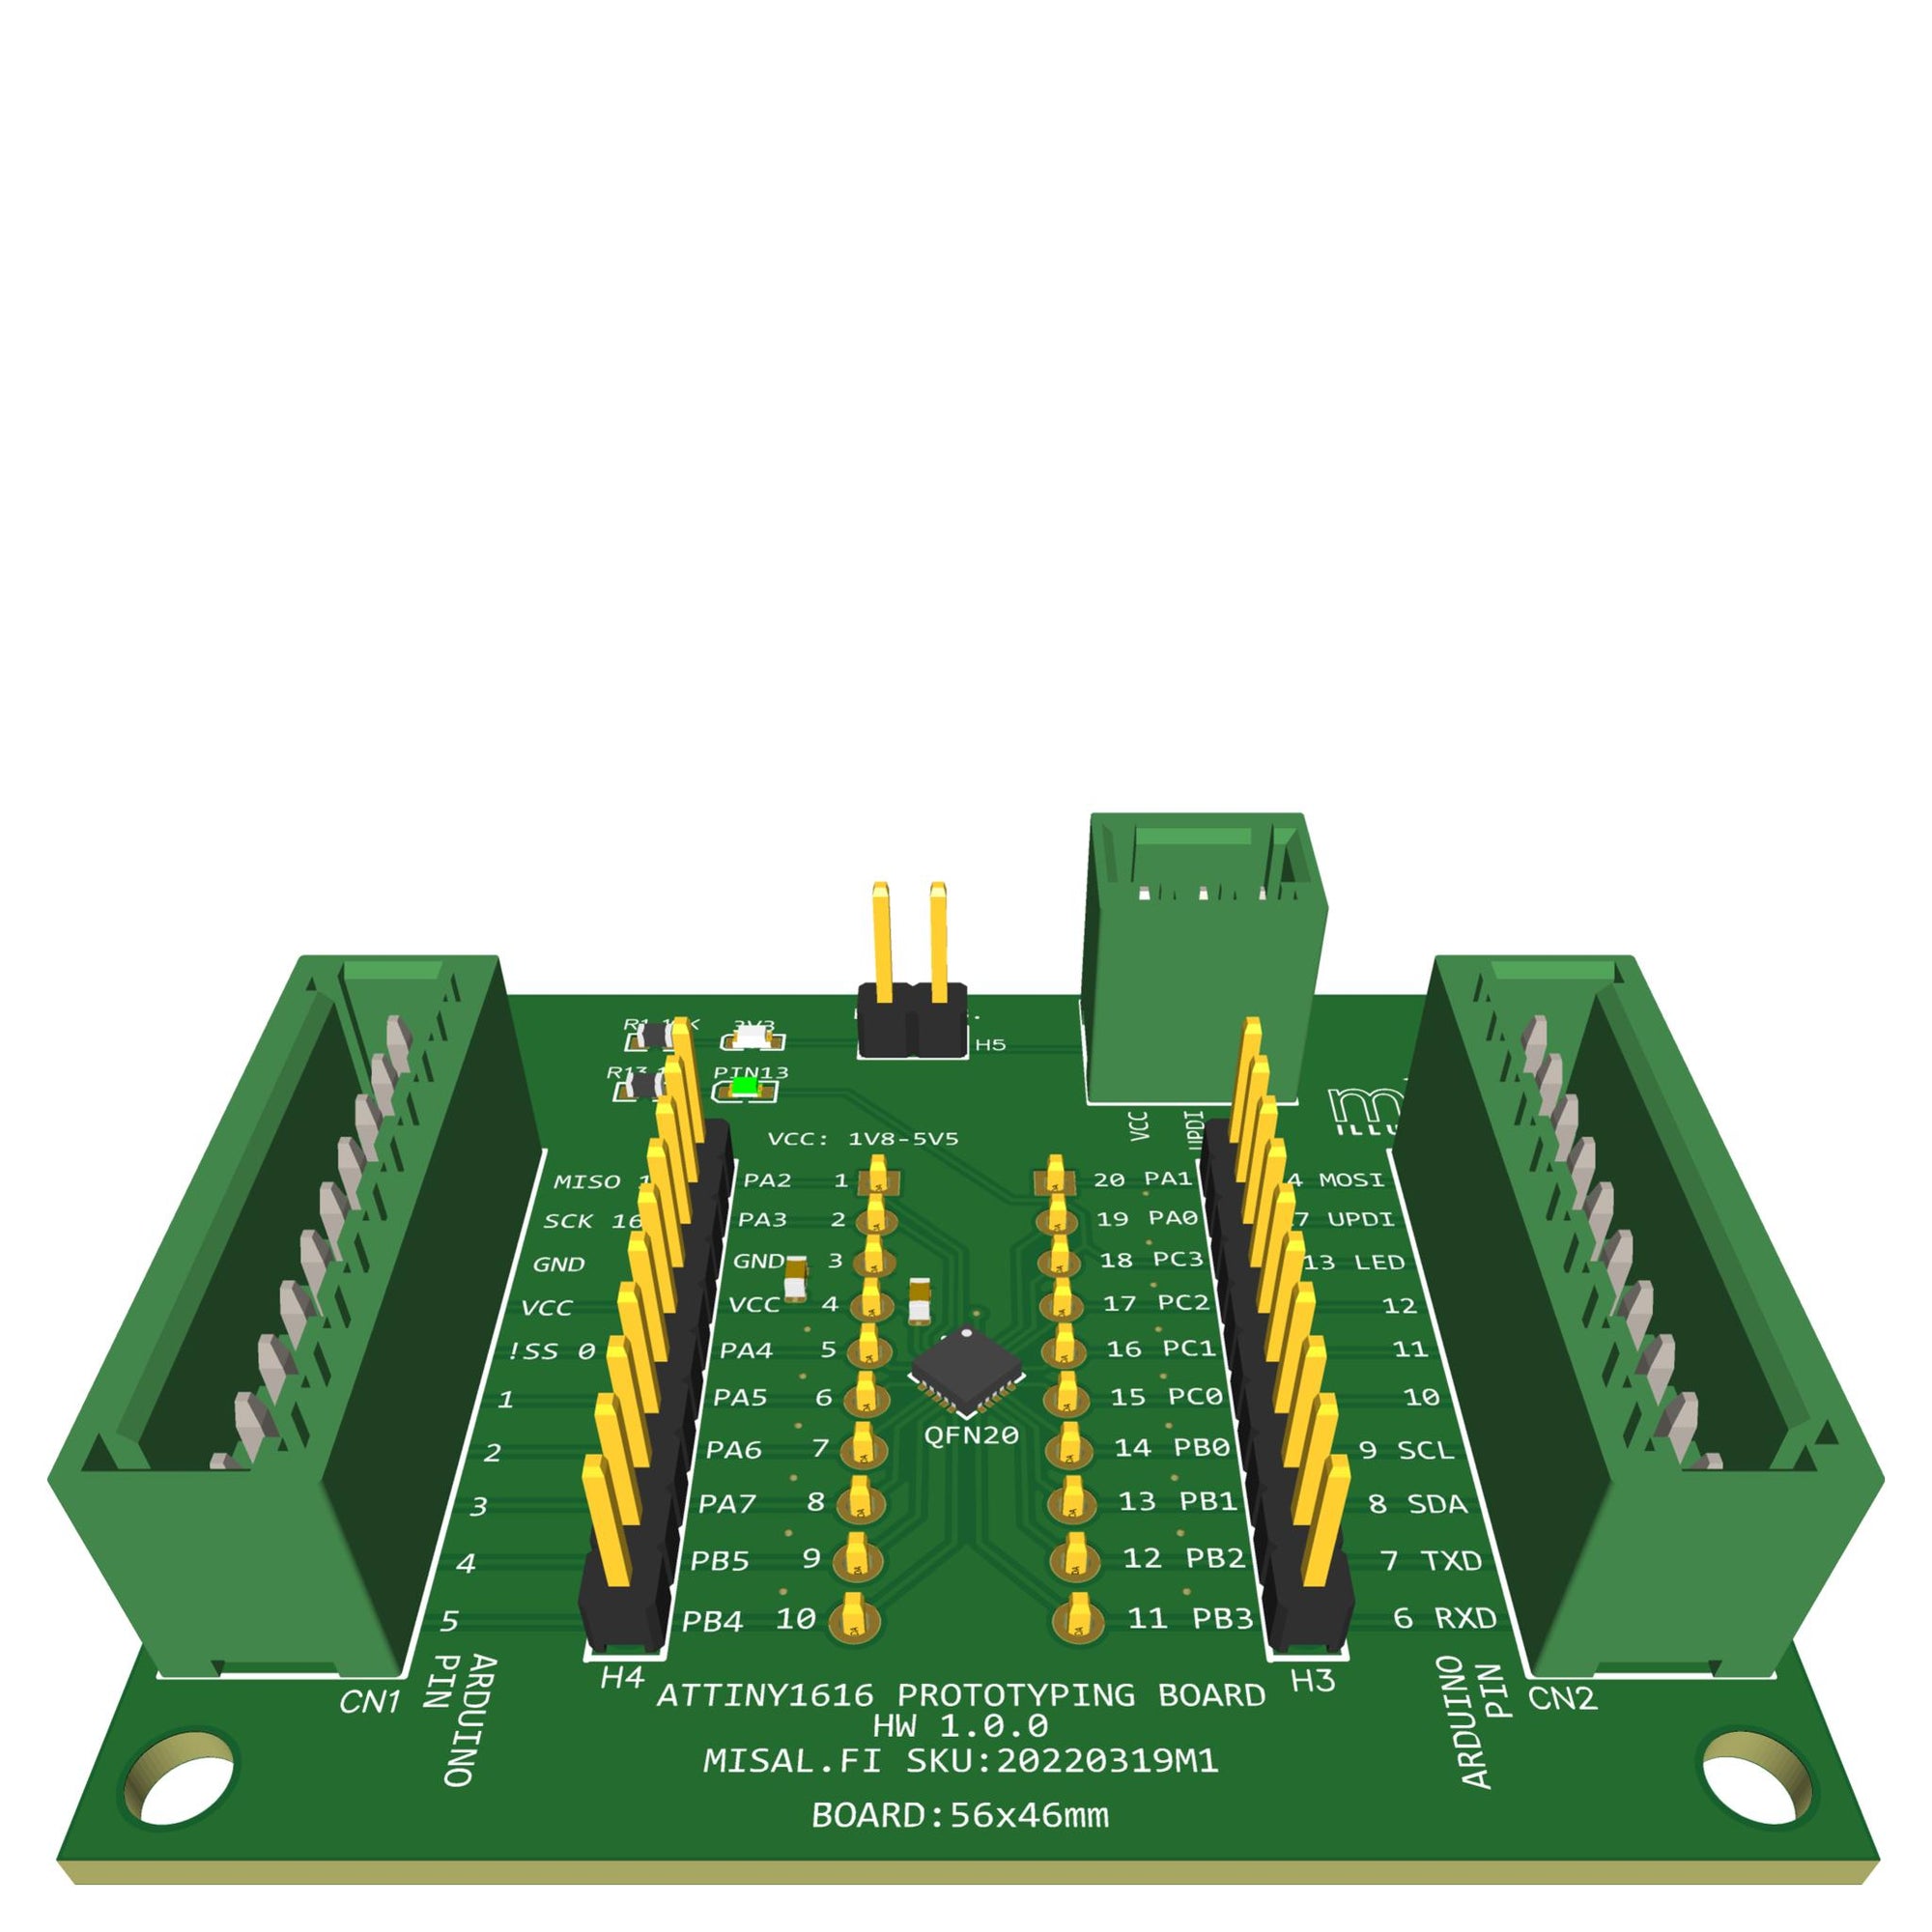 ATtiny1616 evaluation and prototyping board